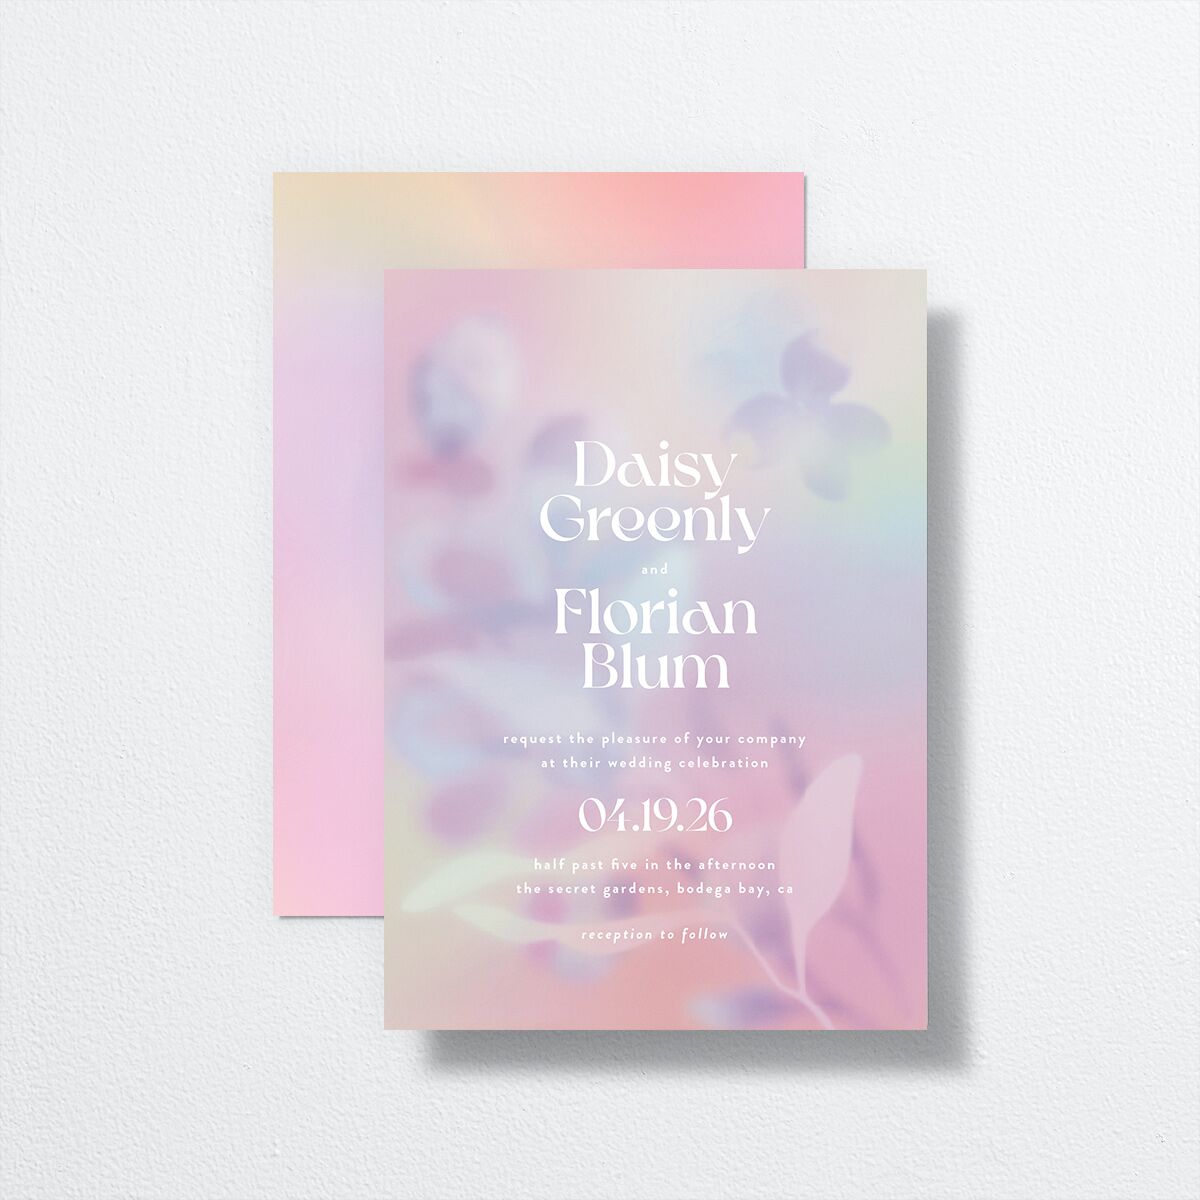 Ethereal Blur Wedding Invitations front-and-back in pink